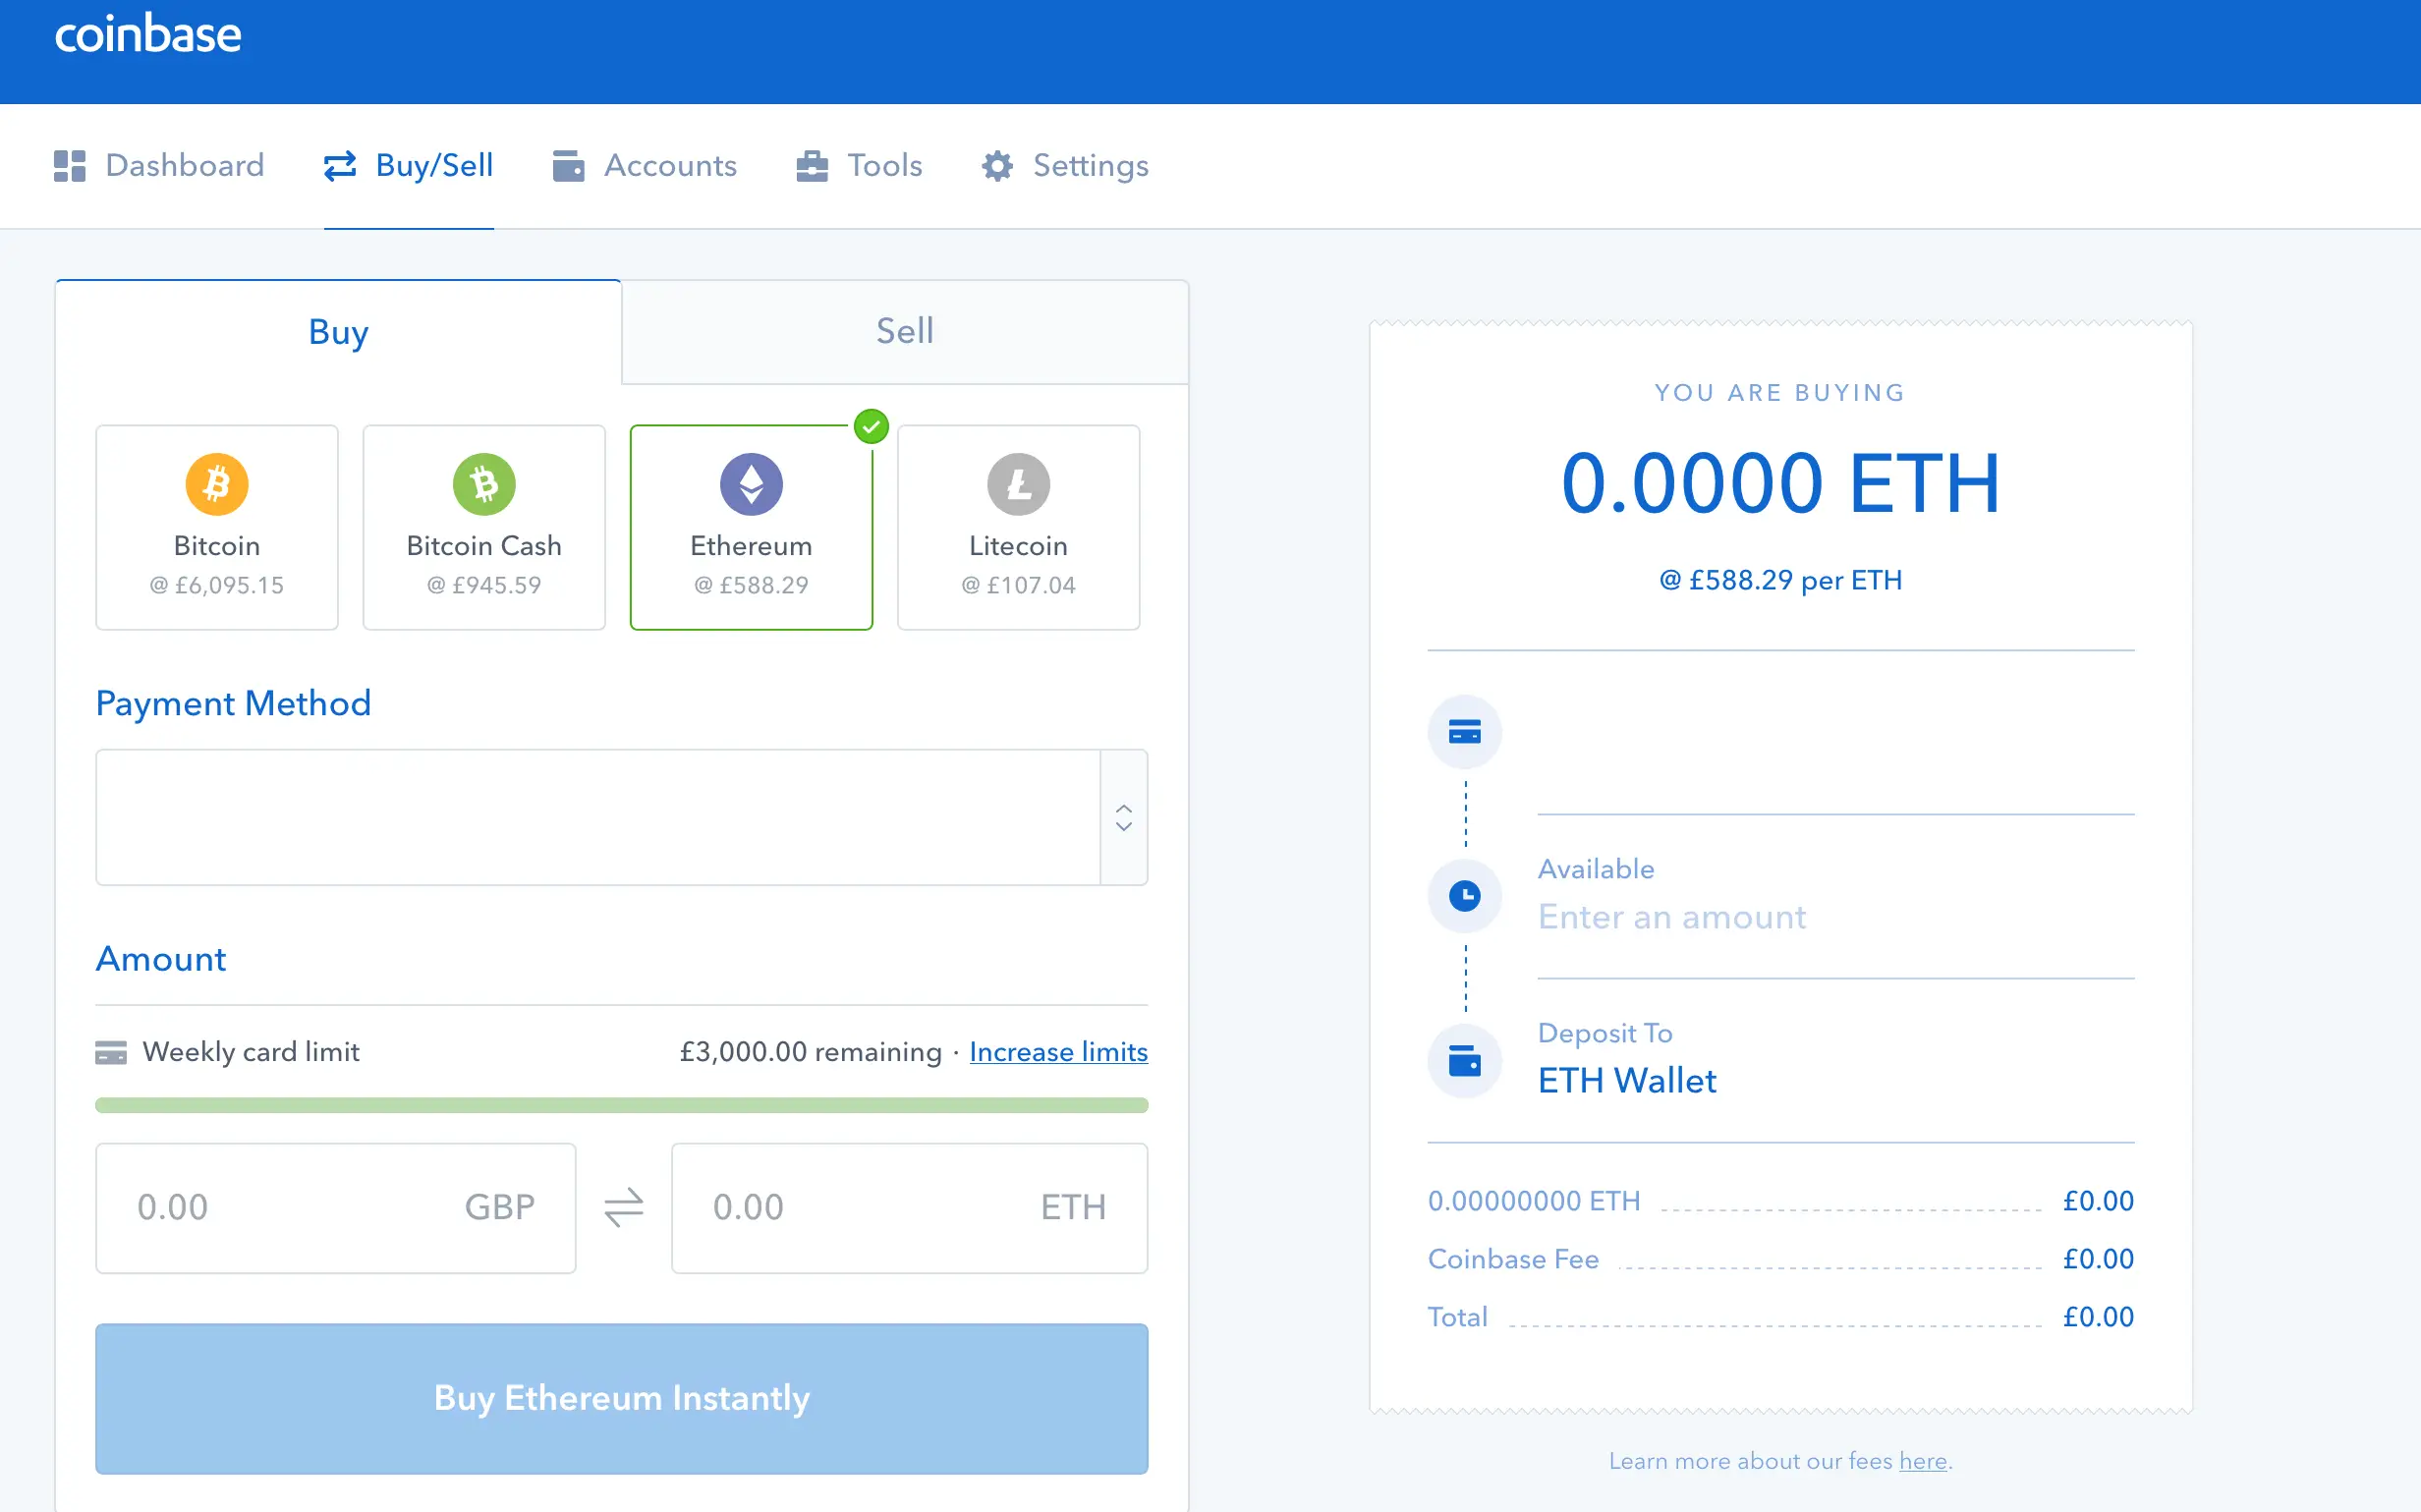 Buy And Sell on Coinbase